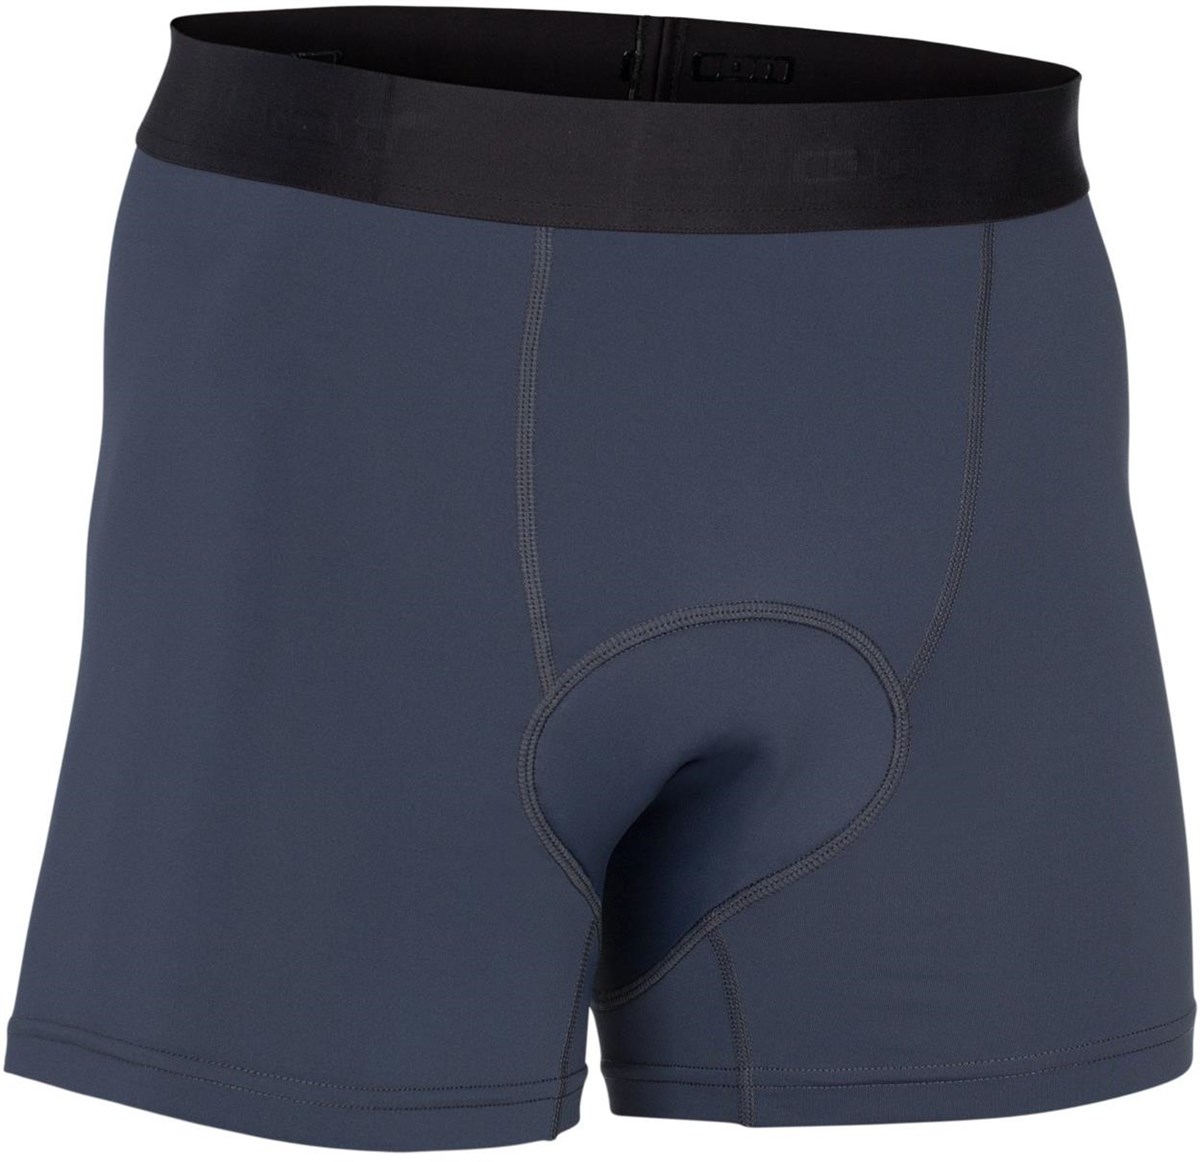 Ion In-Shorts Under Short product image